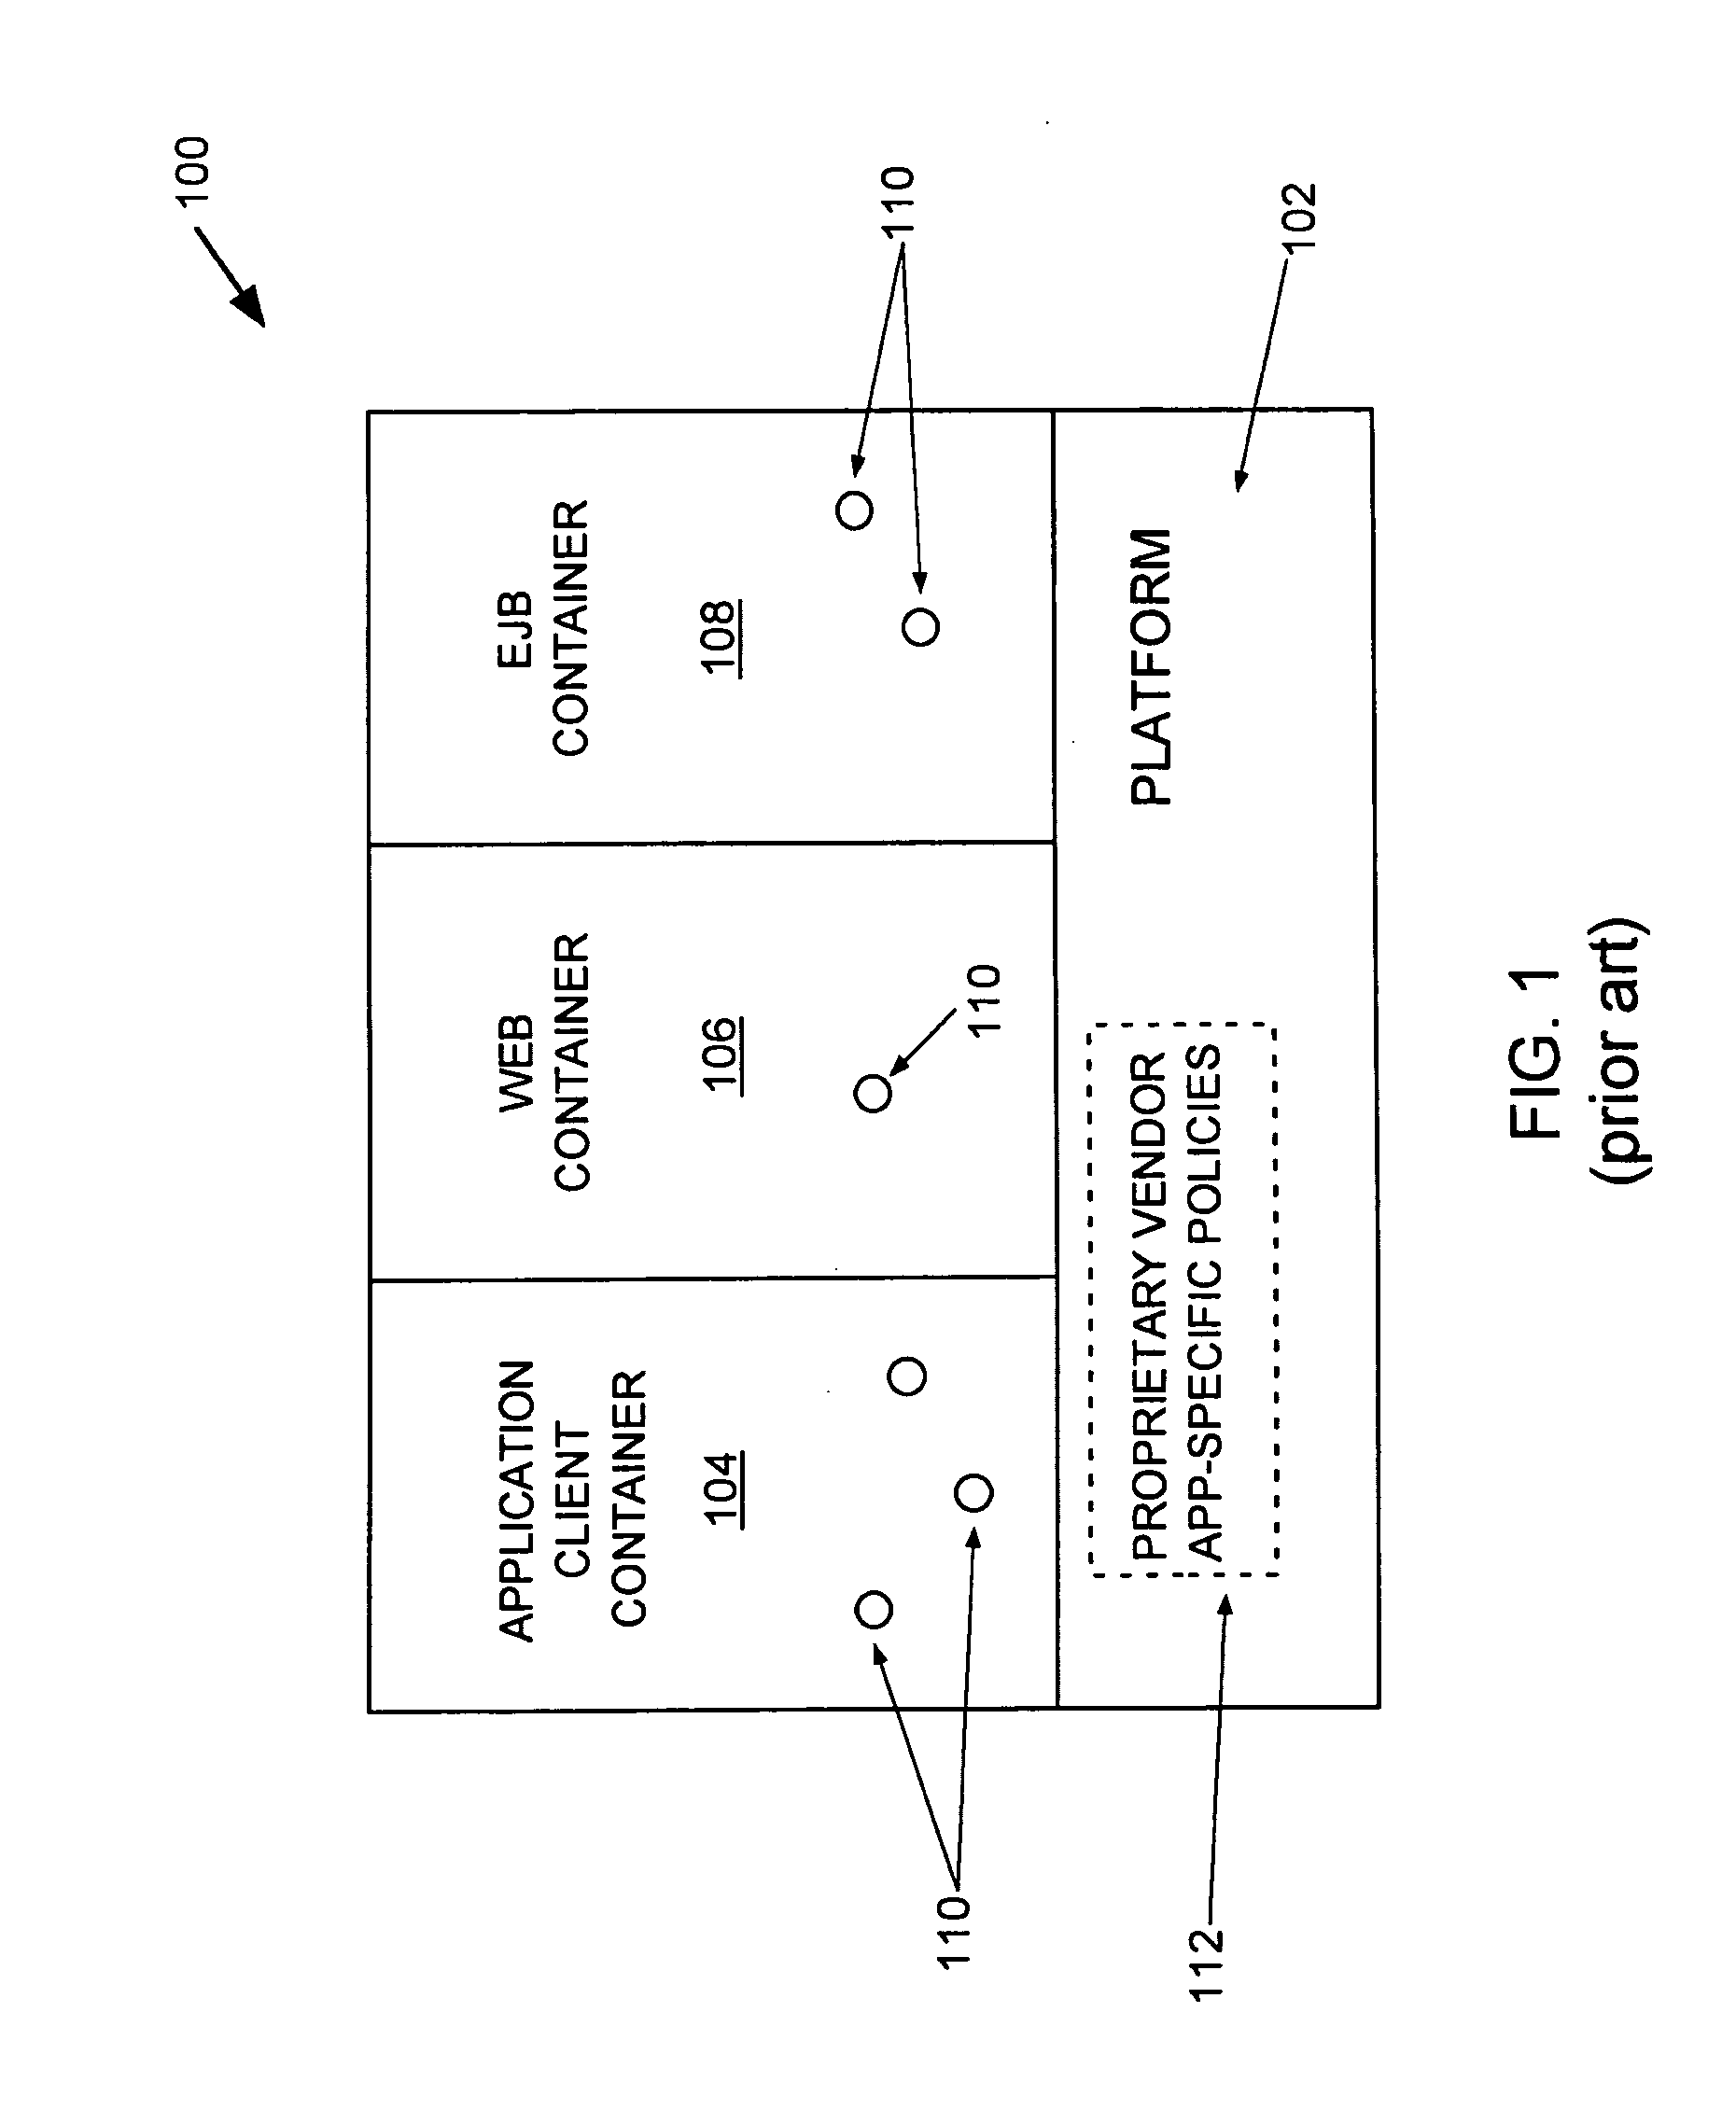 Method and apparatus for performing online application upgrades in a java platform